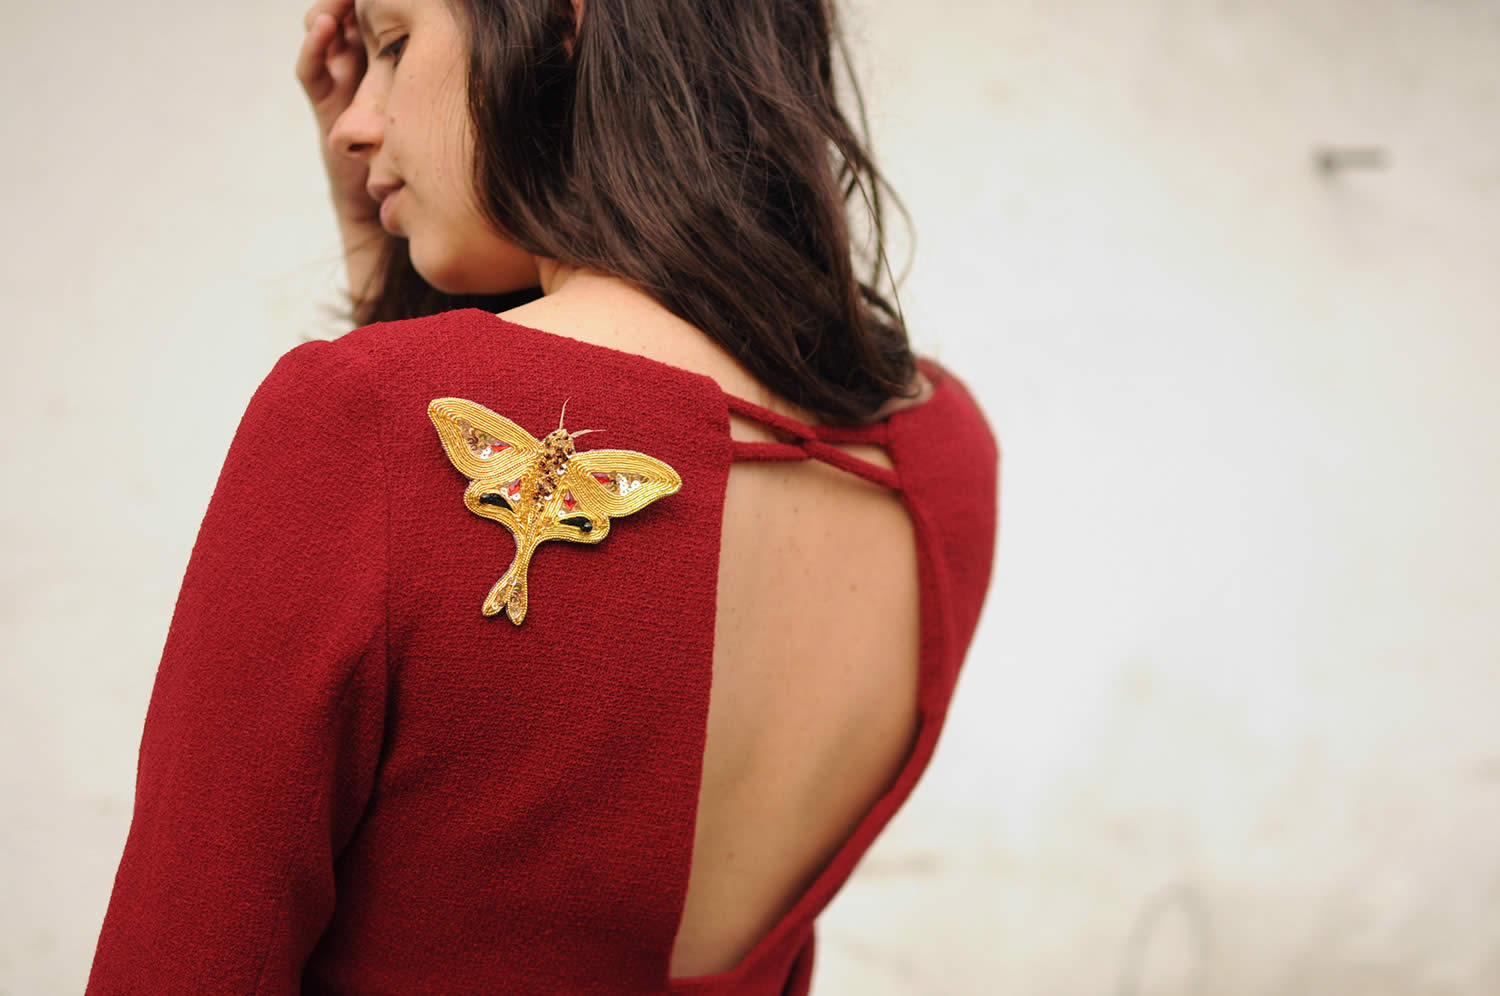 Hand-embroidered moth brooch - Goldwork Couture Embroidery